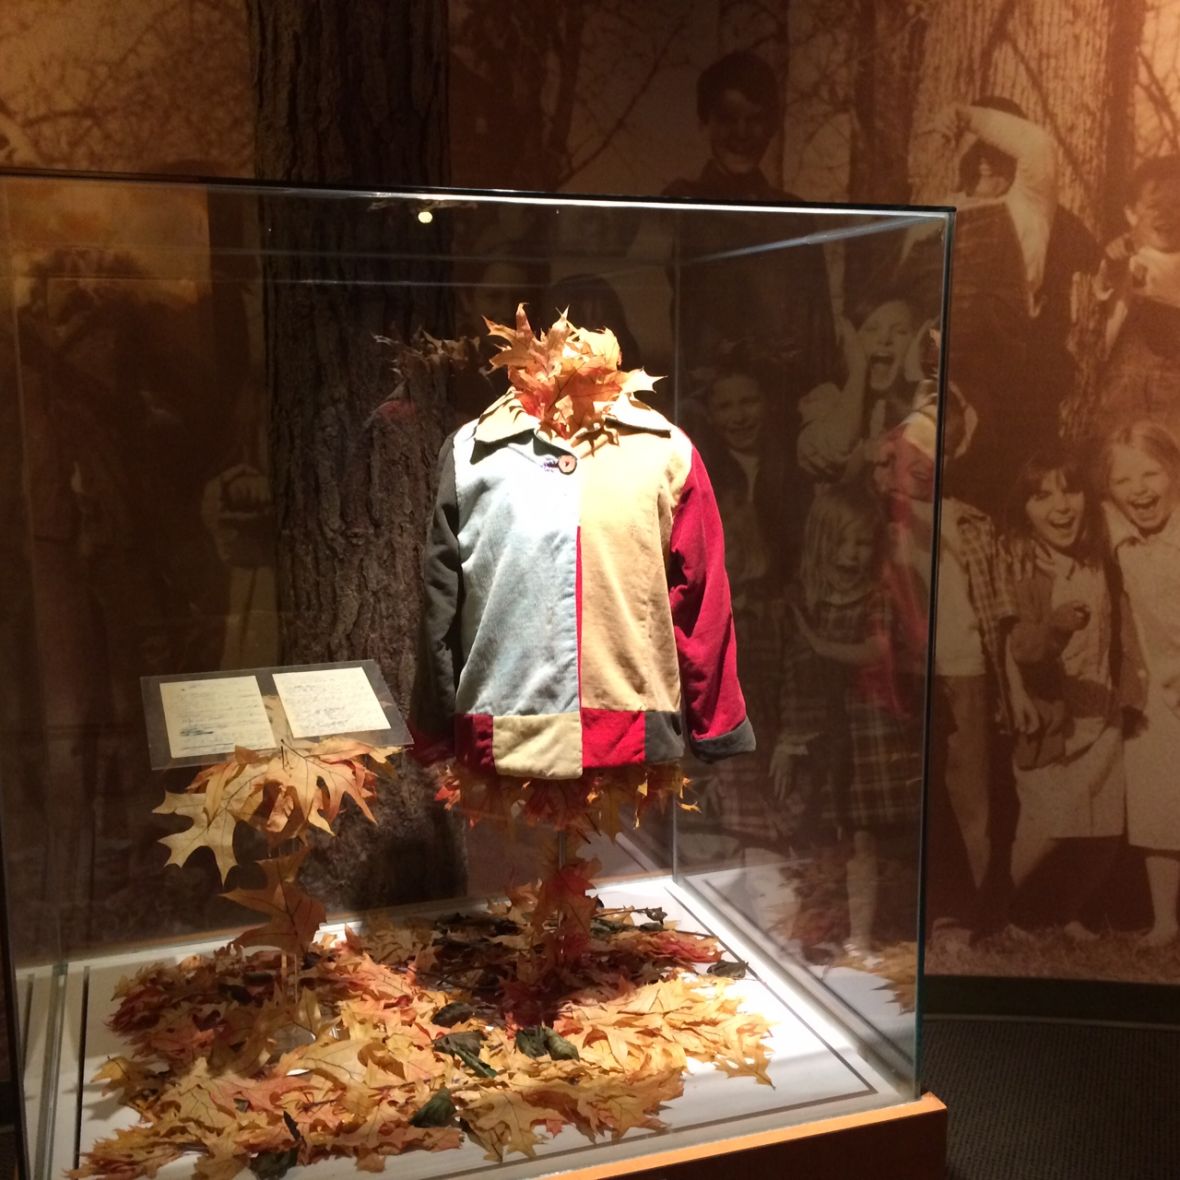 Dolly Parton’s Life Story at the Chasing Rainbows Museum in Dollywood